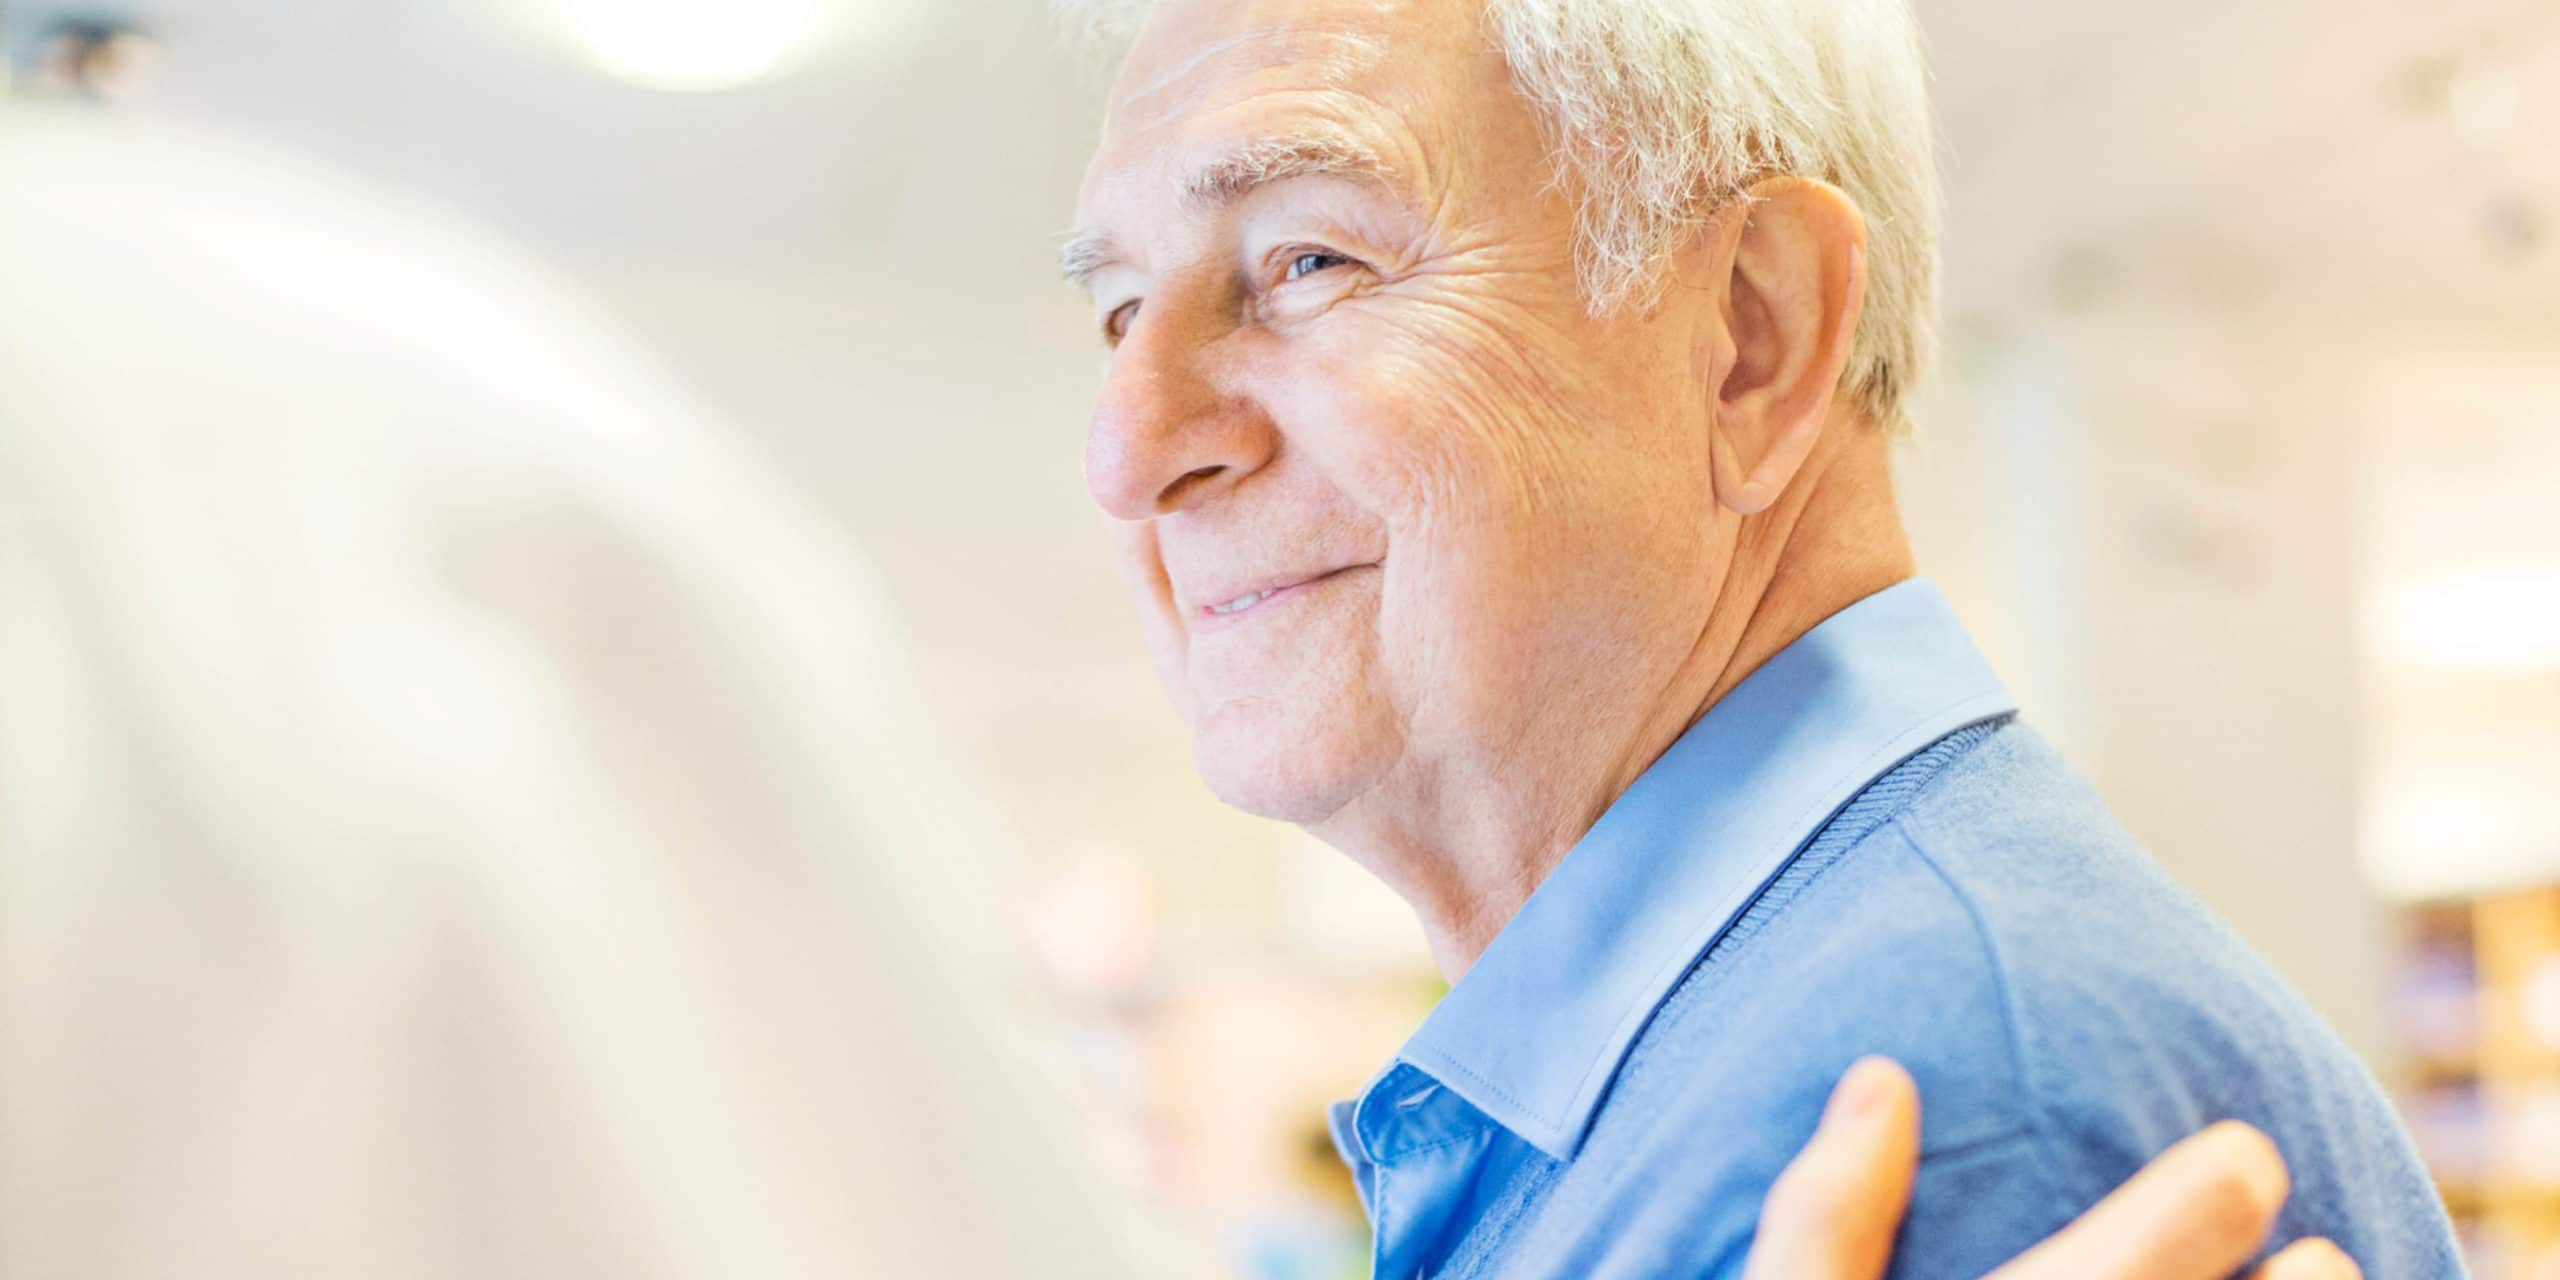 Elderly male patient smiling with the doctor's hand on their shoulder